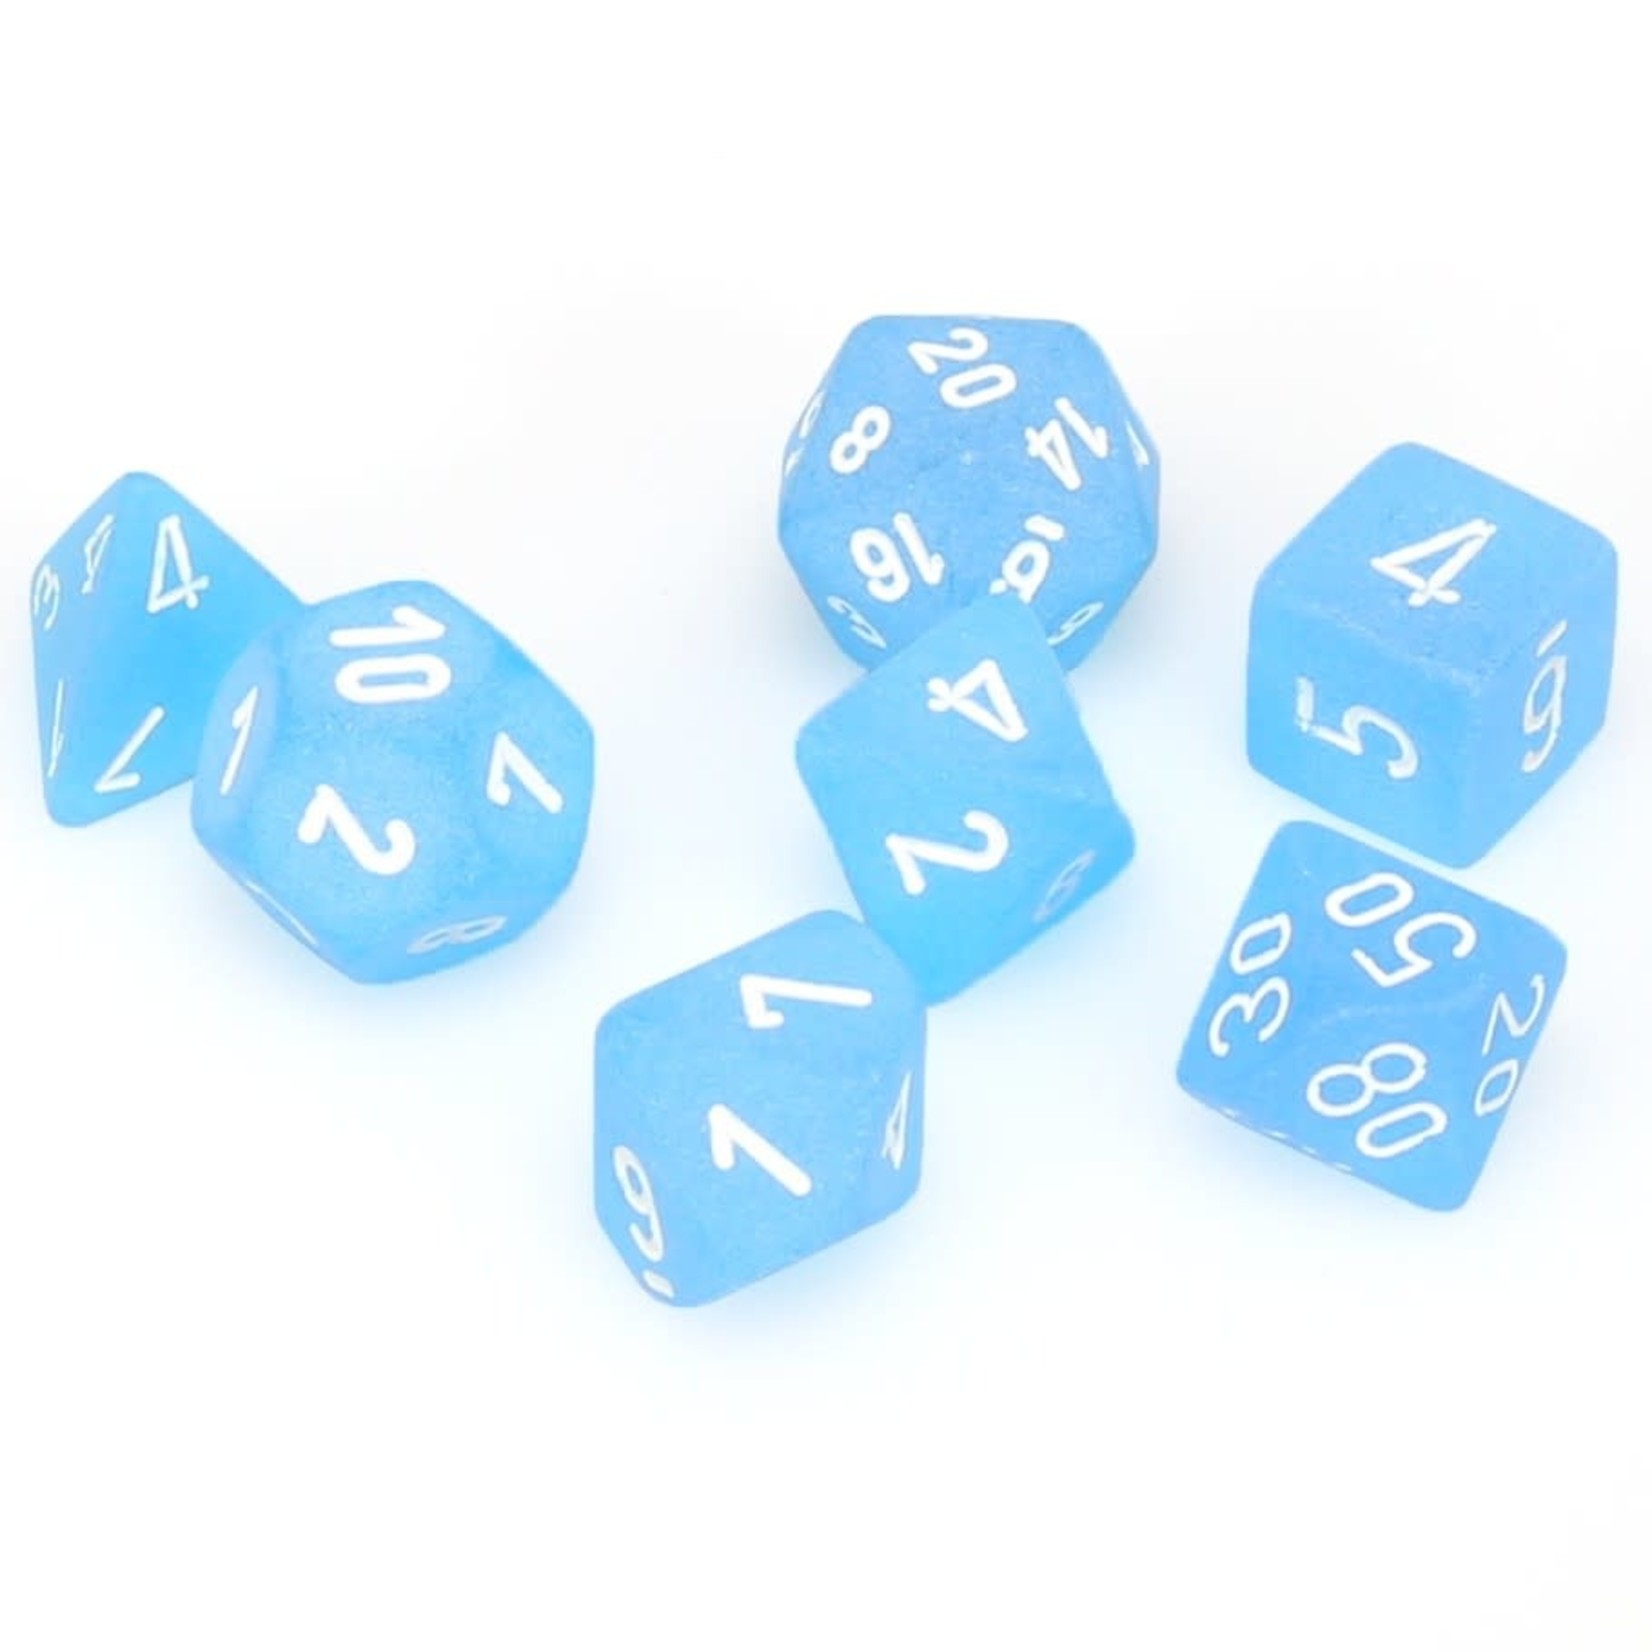 Chessex Chessex Frosted Caribbean Blue with White Polyhedral 7 die set